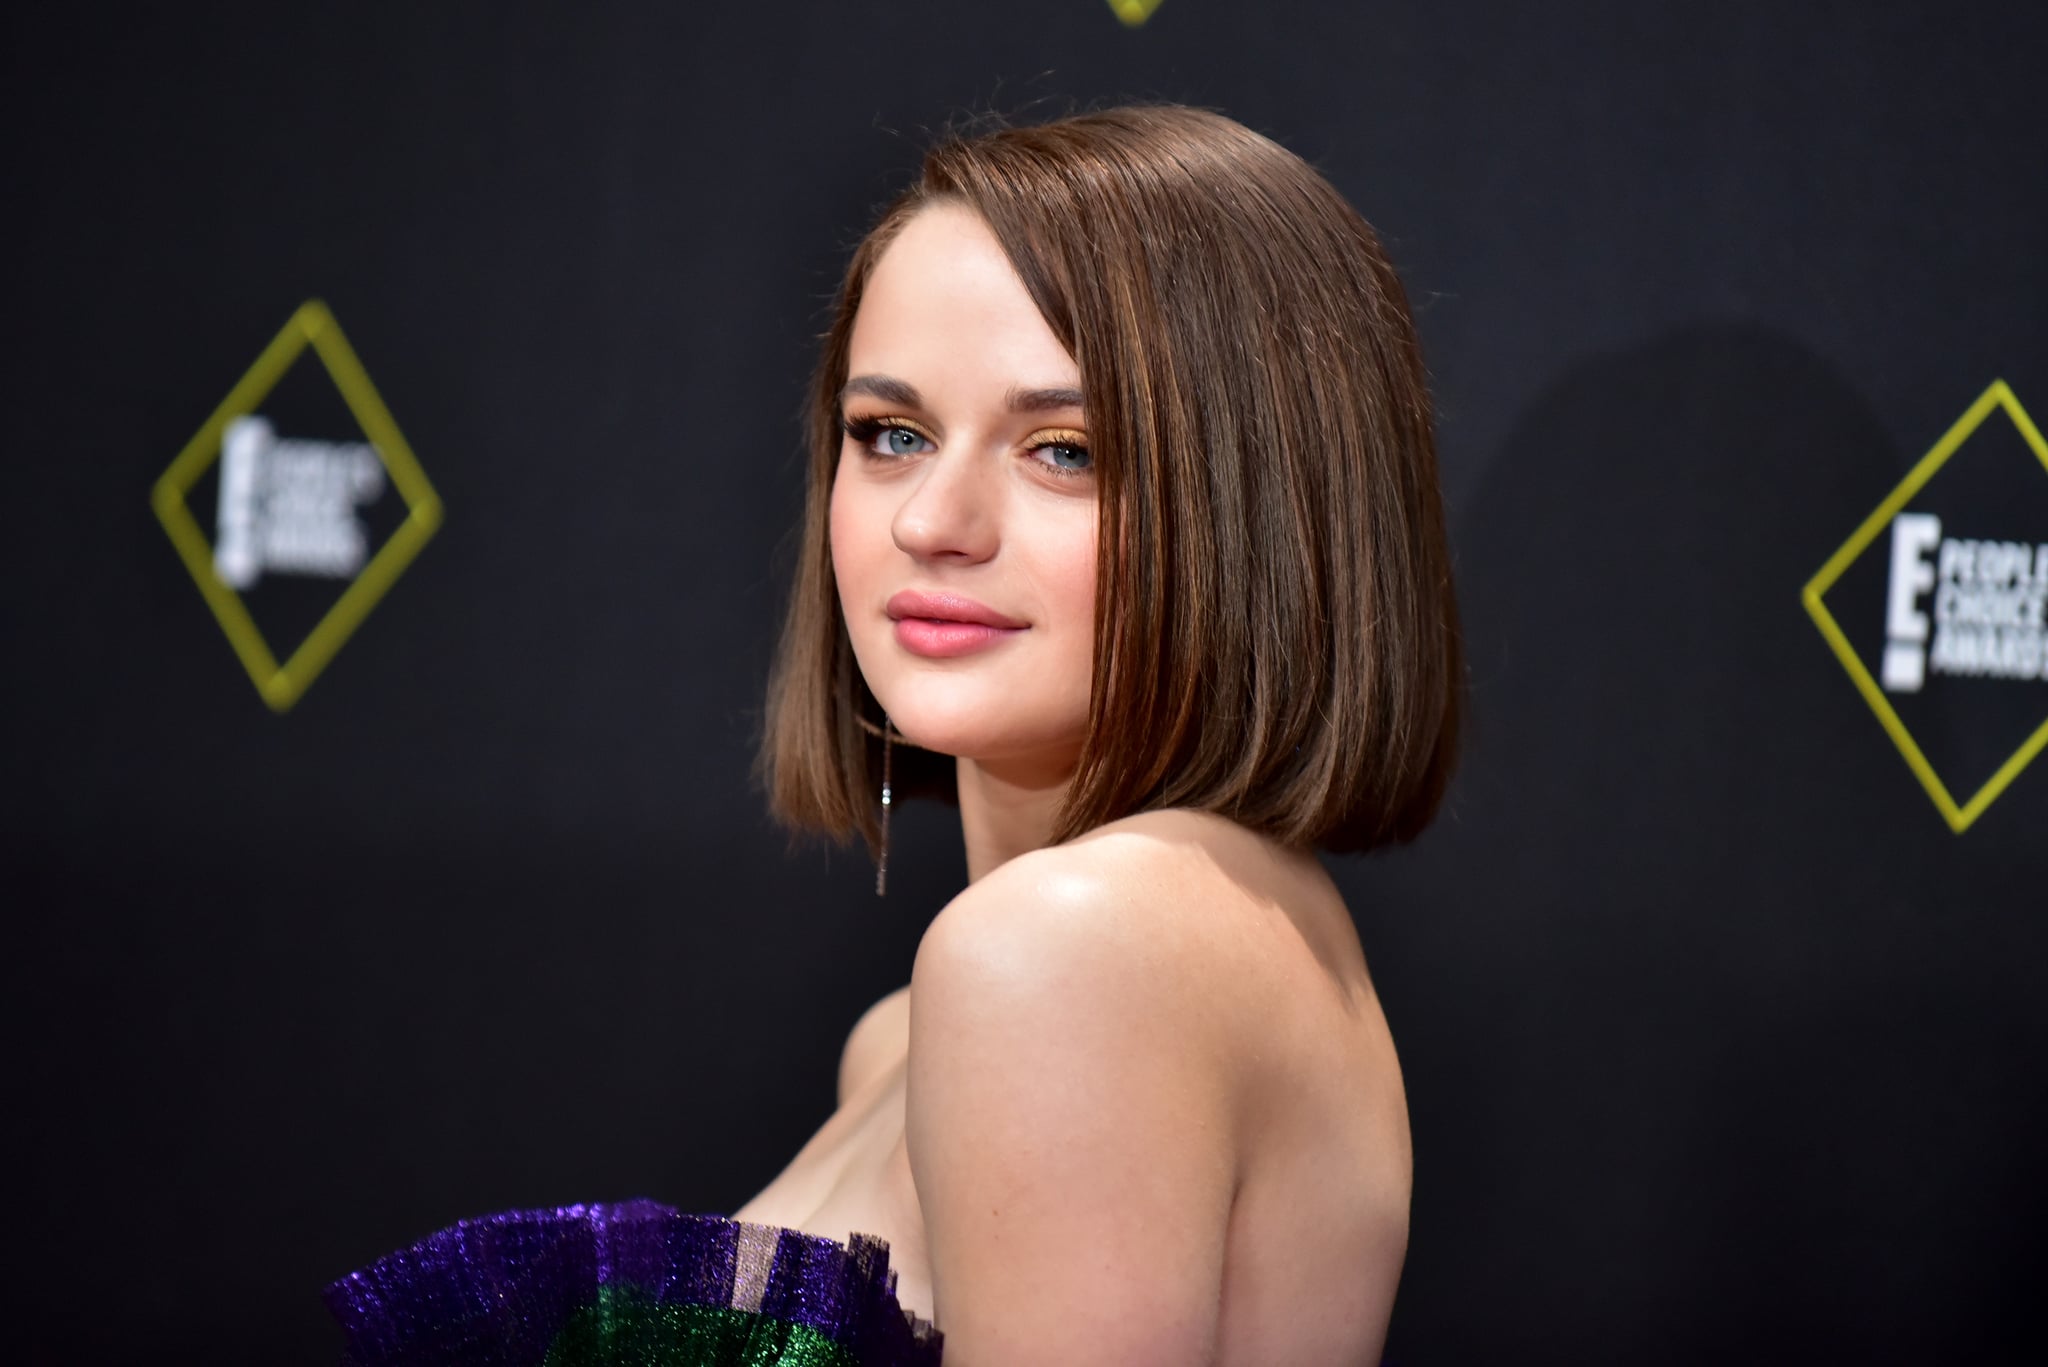 SANTA MONICA, CALIFORNIA - NOVEMBER 10: Joey King attends the 2019 E! People's Choice Awards at Barker Hangar on November 10, 2019 in Santa Monica, California. (Photo by Rodin Eckenroth/WireImage)